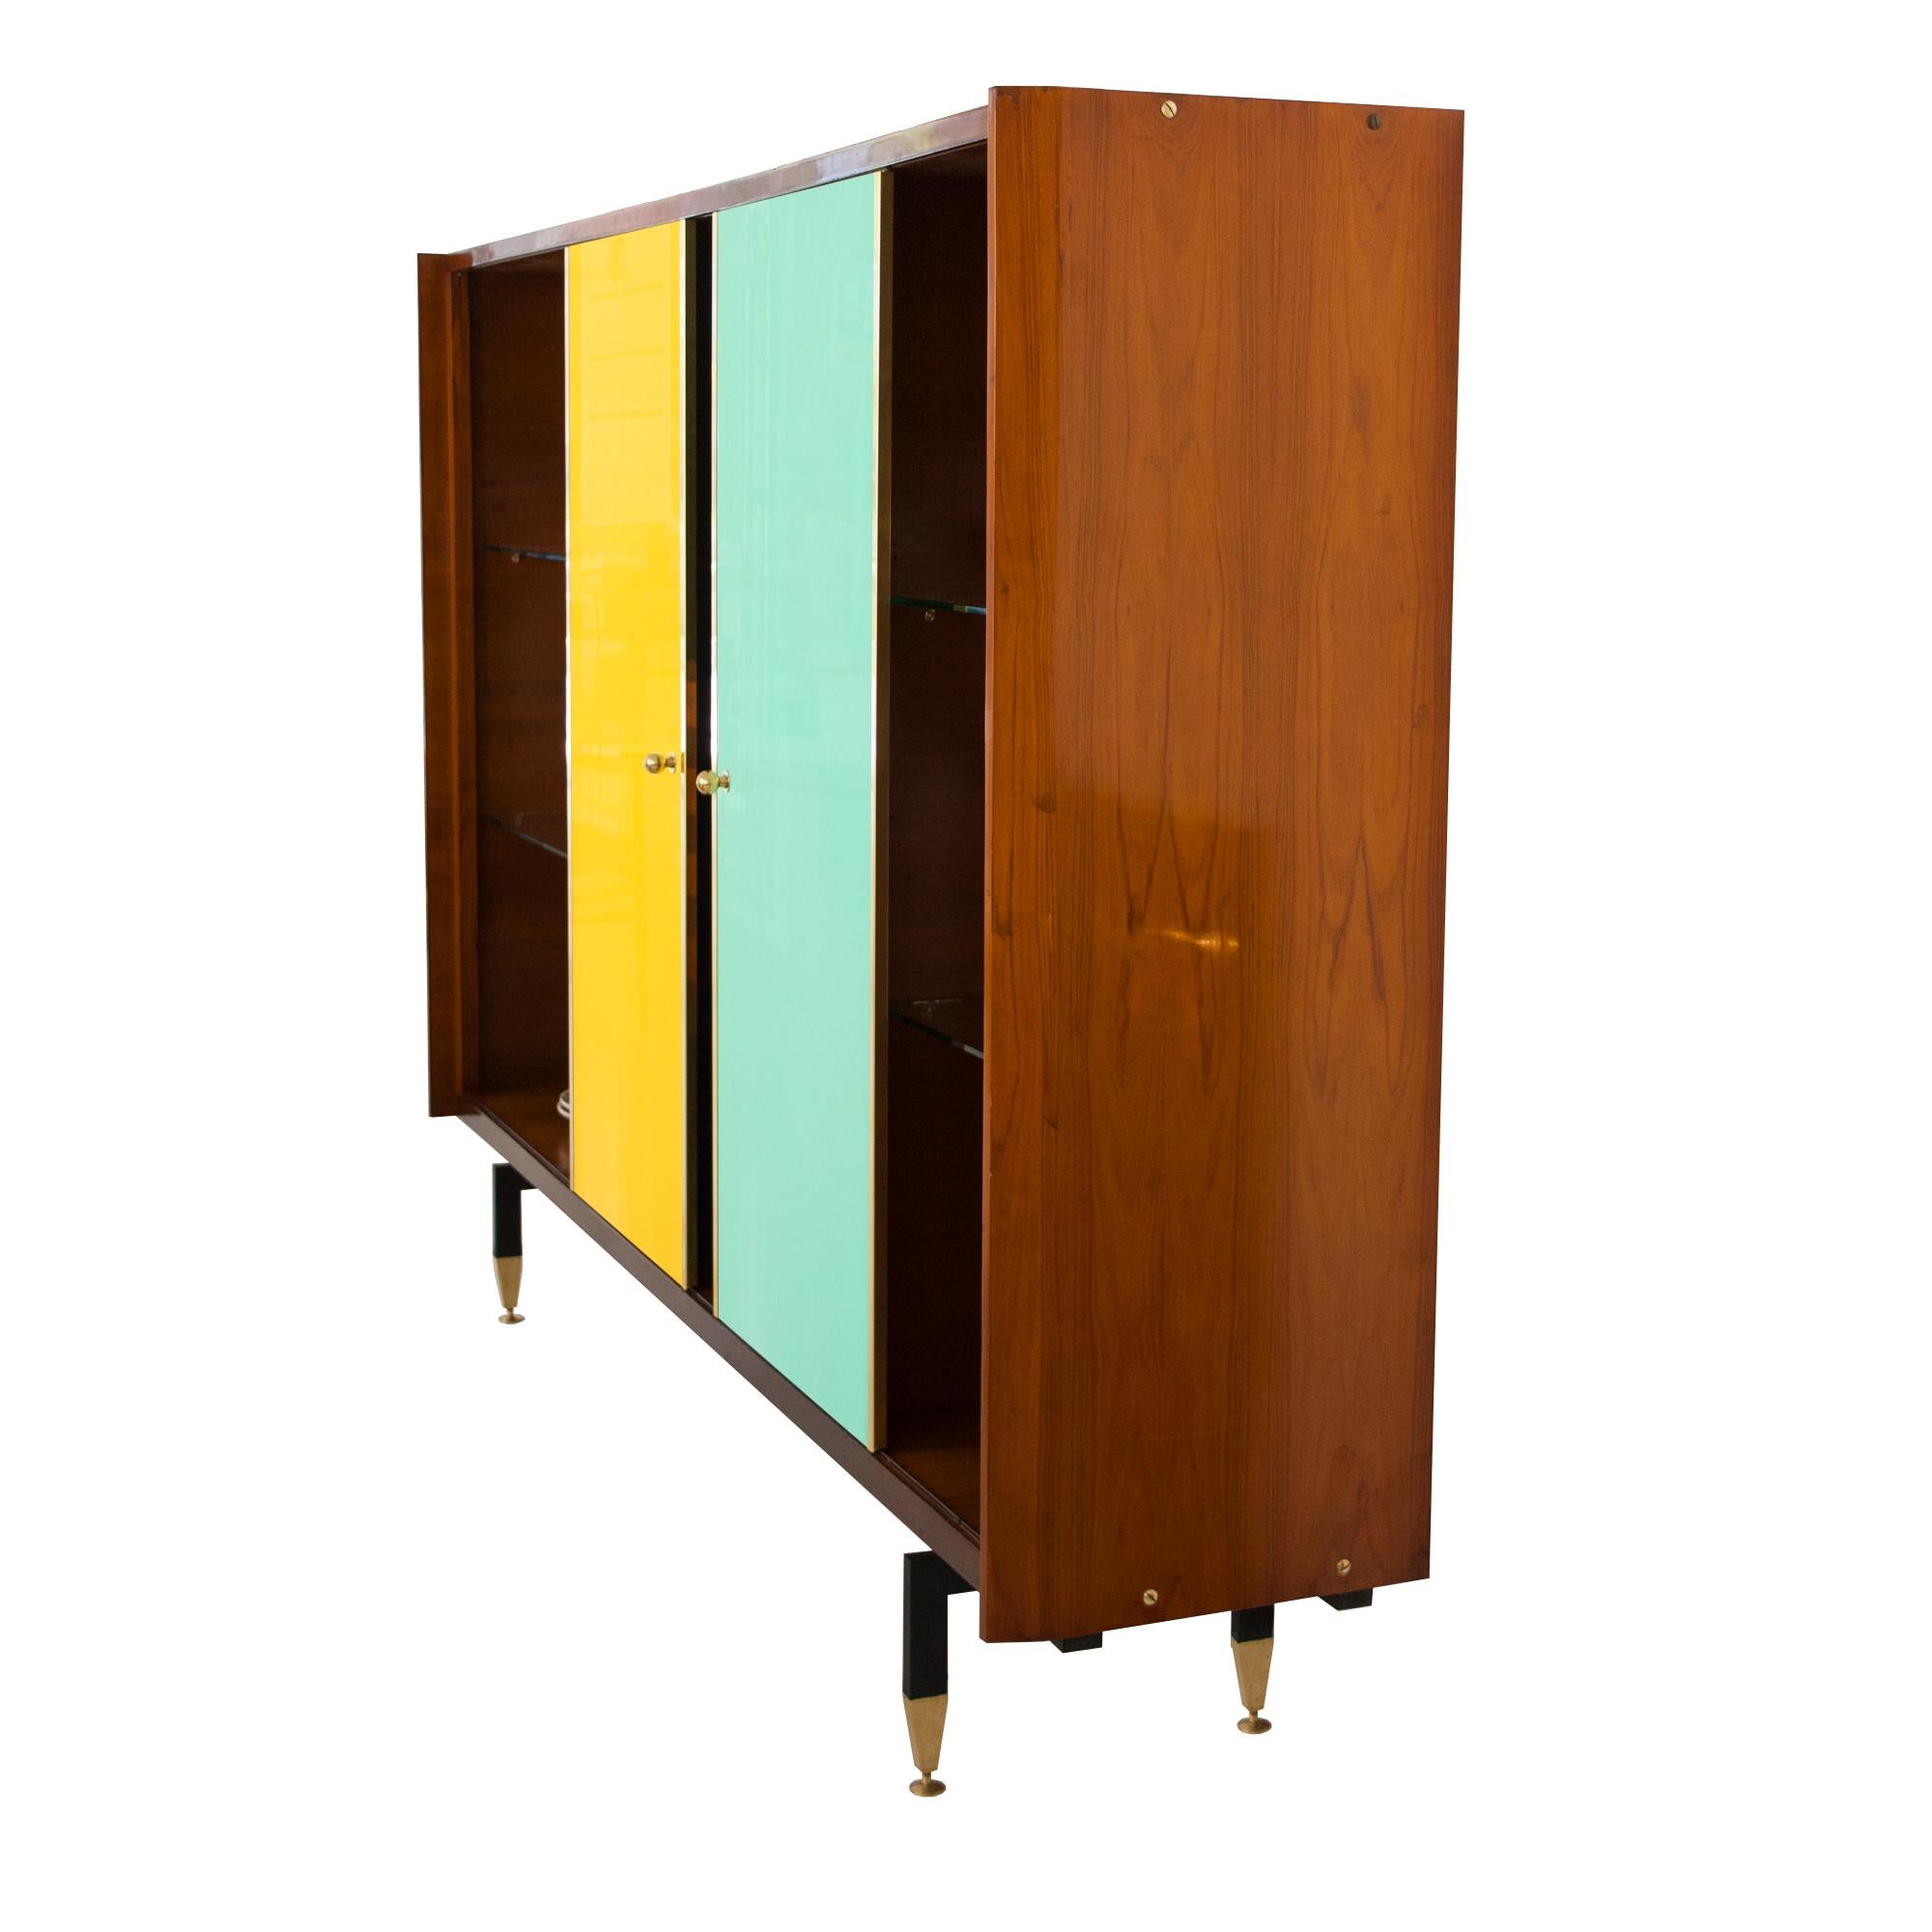 Sideboard made of teak with colored glass sliding doors with brass finishes. Composed of 3 sections, 2 sides with tempered glass shelves and a central one with two decorative holes and 6 drawers. The piece of furniture is supported by a black